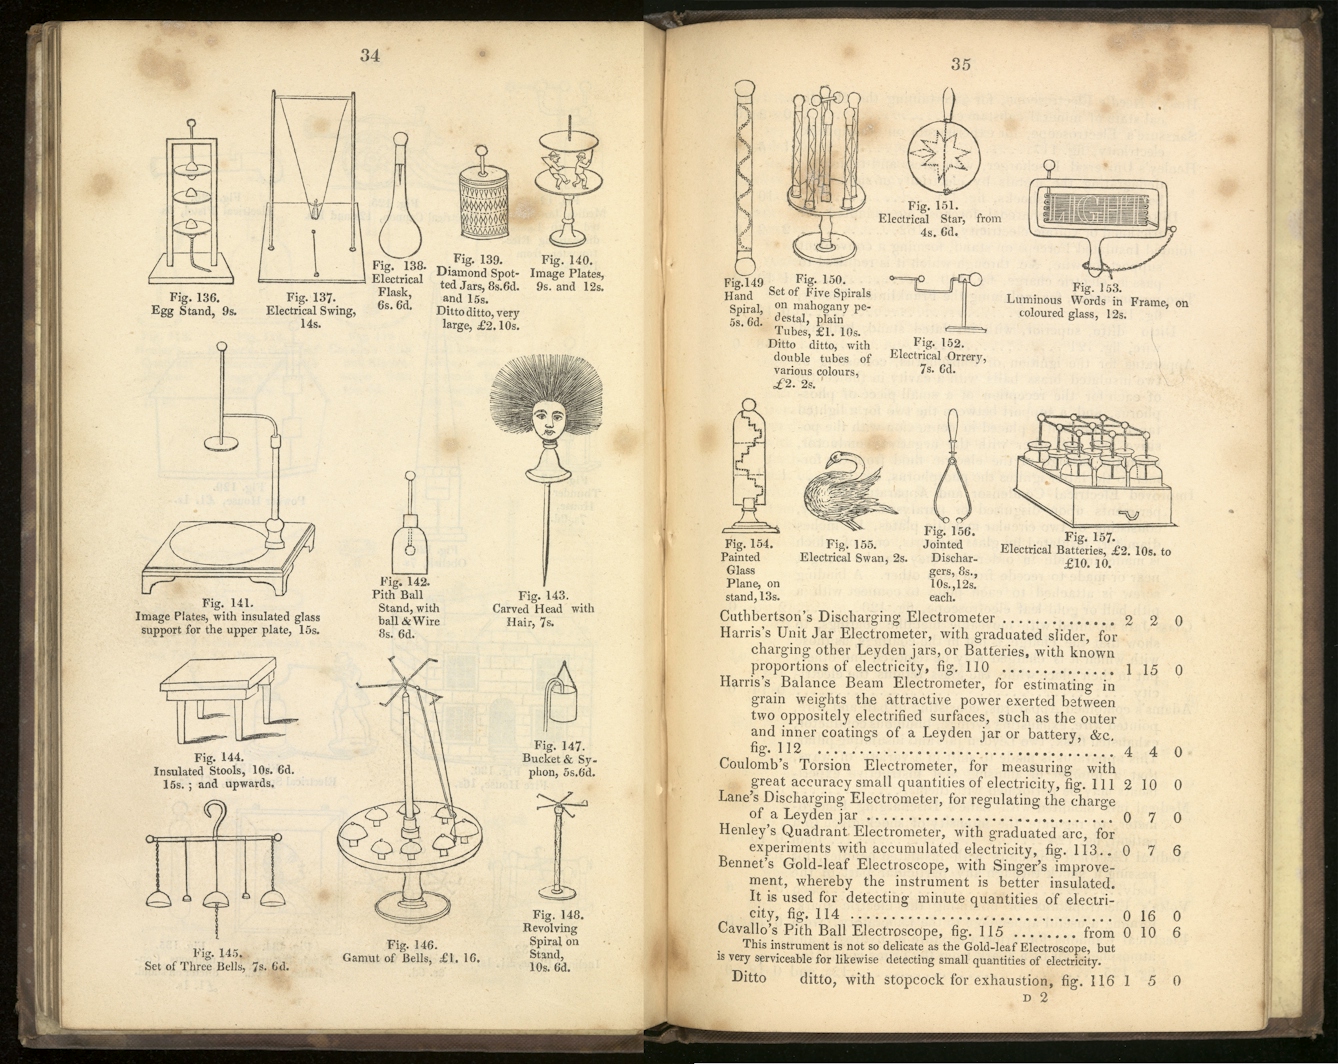 Along with electrical instruments Palmer’s catalogue also included toys such as the ‘electrical swan’ which swam about when placed in electrified water.